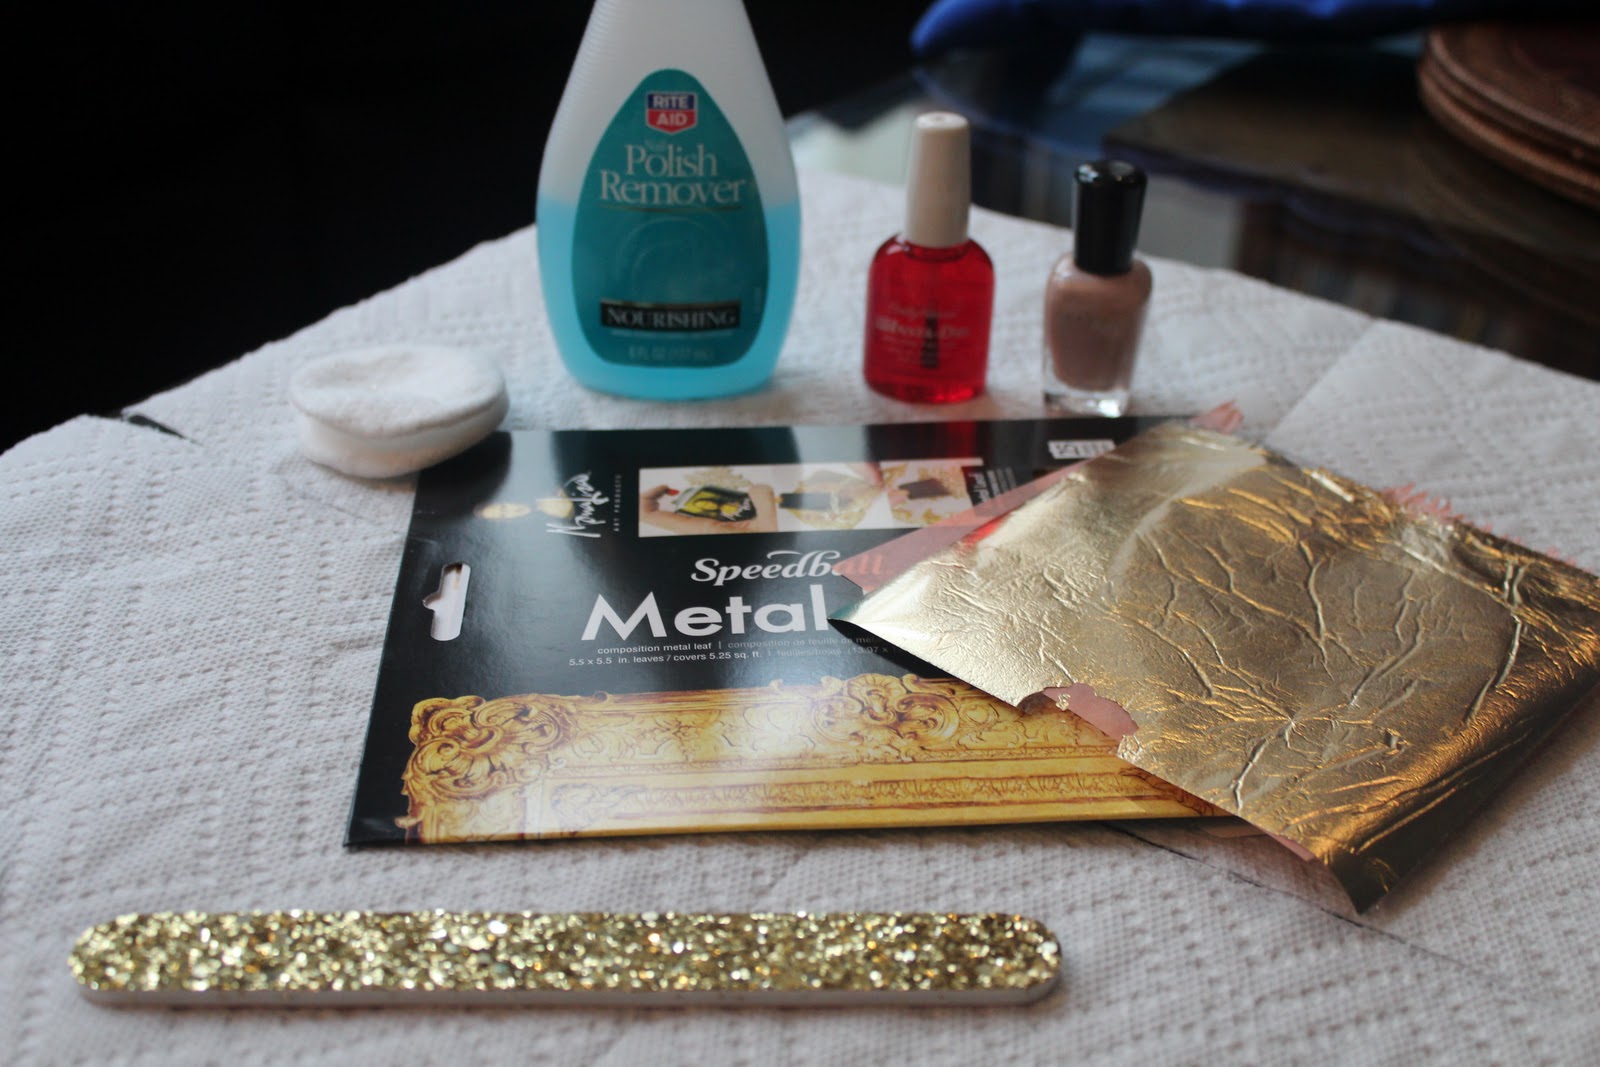 Gold foil nails at home — CMC LIFESTYLE